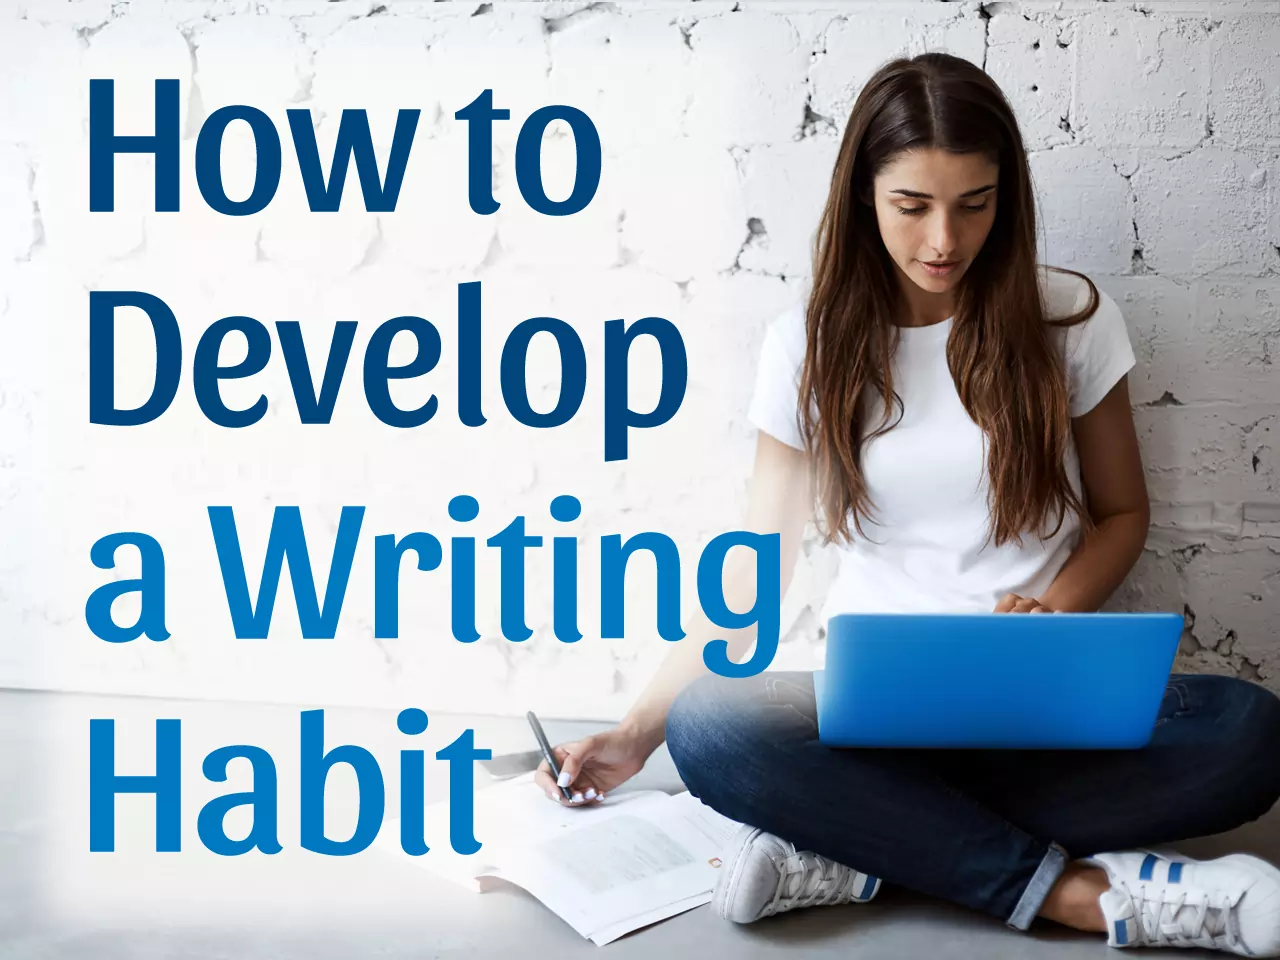 How to Develop a Writing Habit for your next book